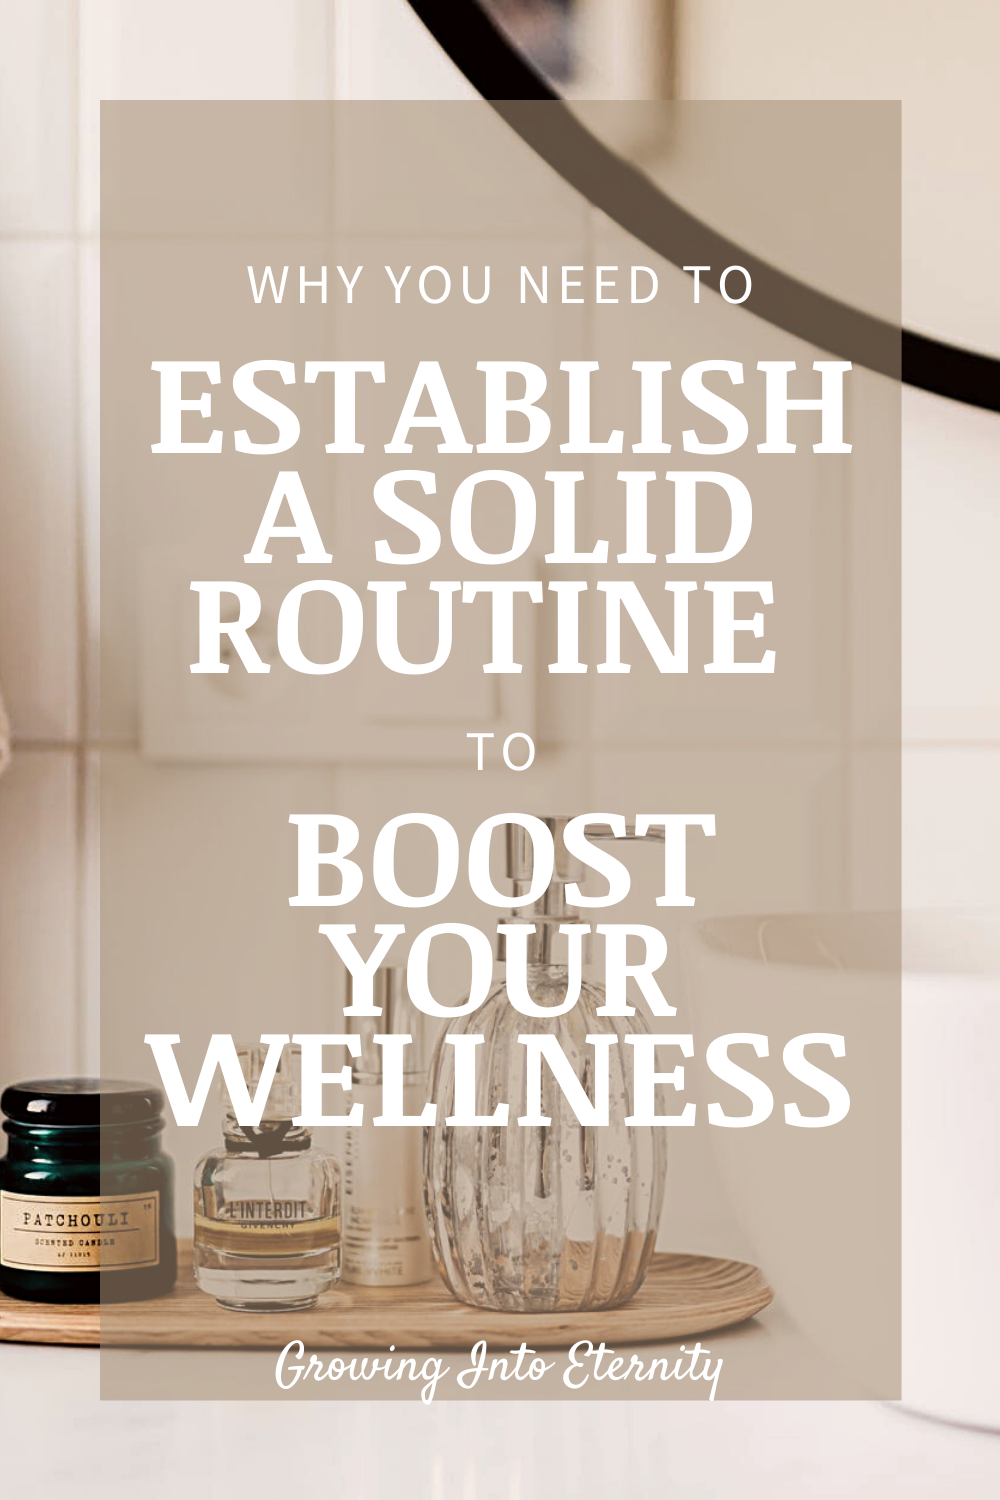 Why you need to establish a solid routine to boost your wellness